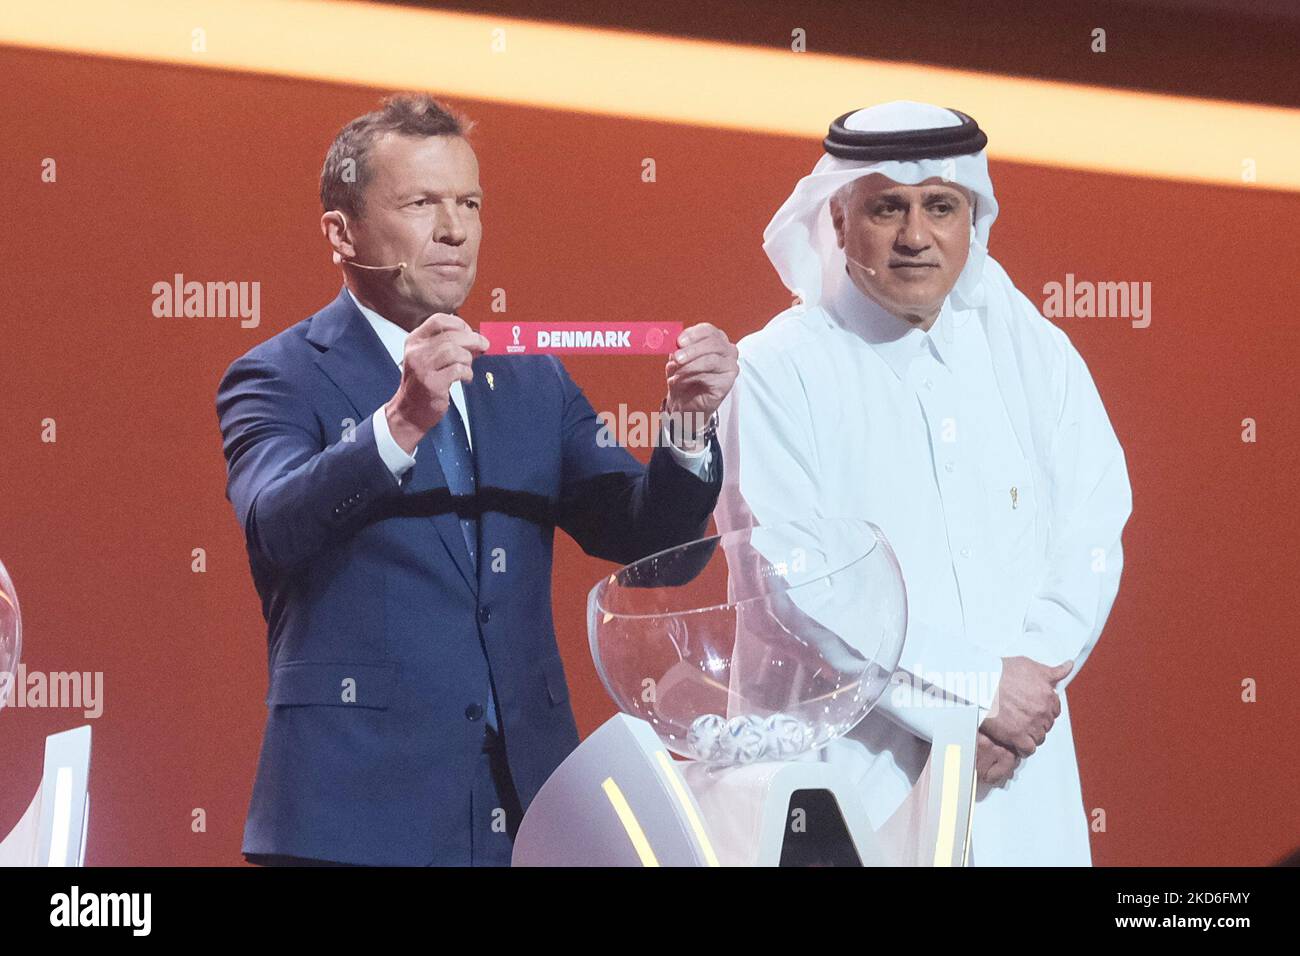 FIFA Legend Lothar Matthaus draws Denmark during the FIFA World Cup Qatar 2022 Final Draw at Doha Exhibition and Convention Center on April 1, 2022 in Doha, Qatar. (Photo by Simon Holmes/NurPhoto) Stock Photo